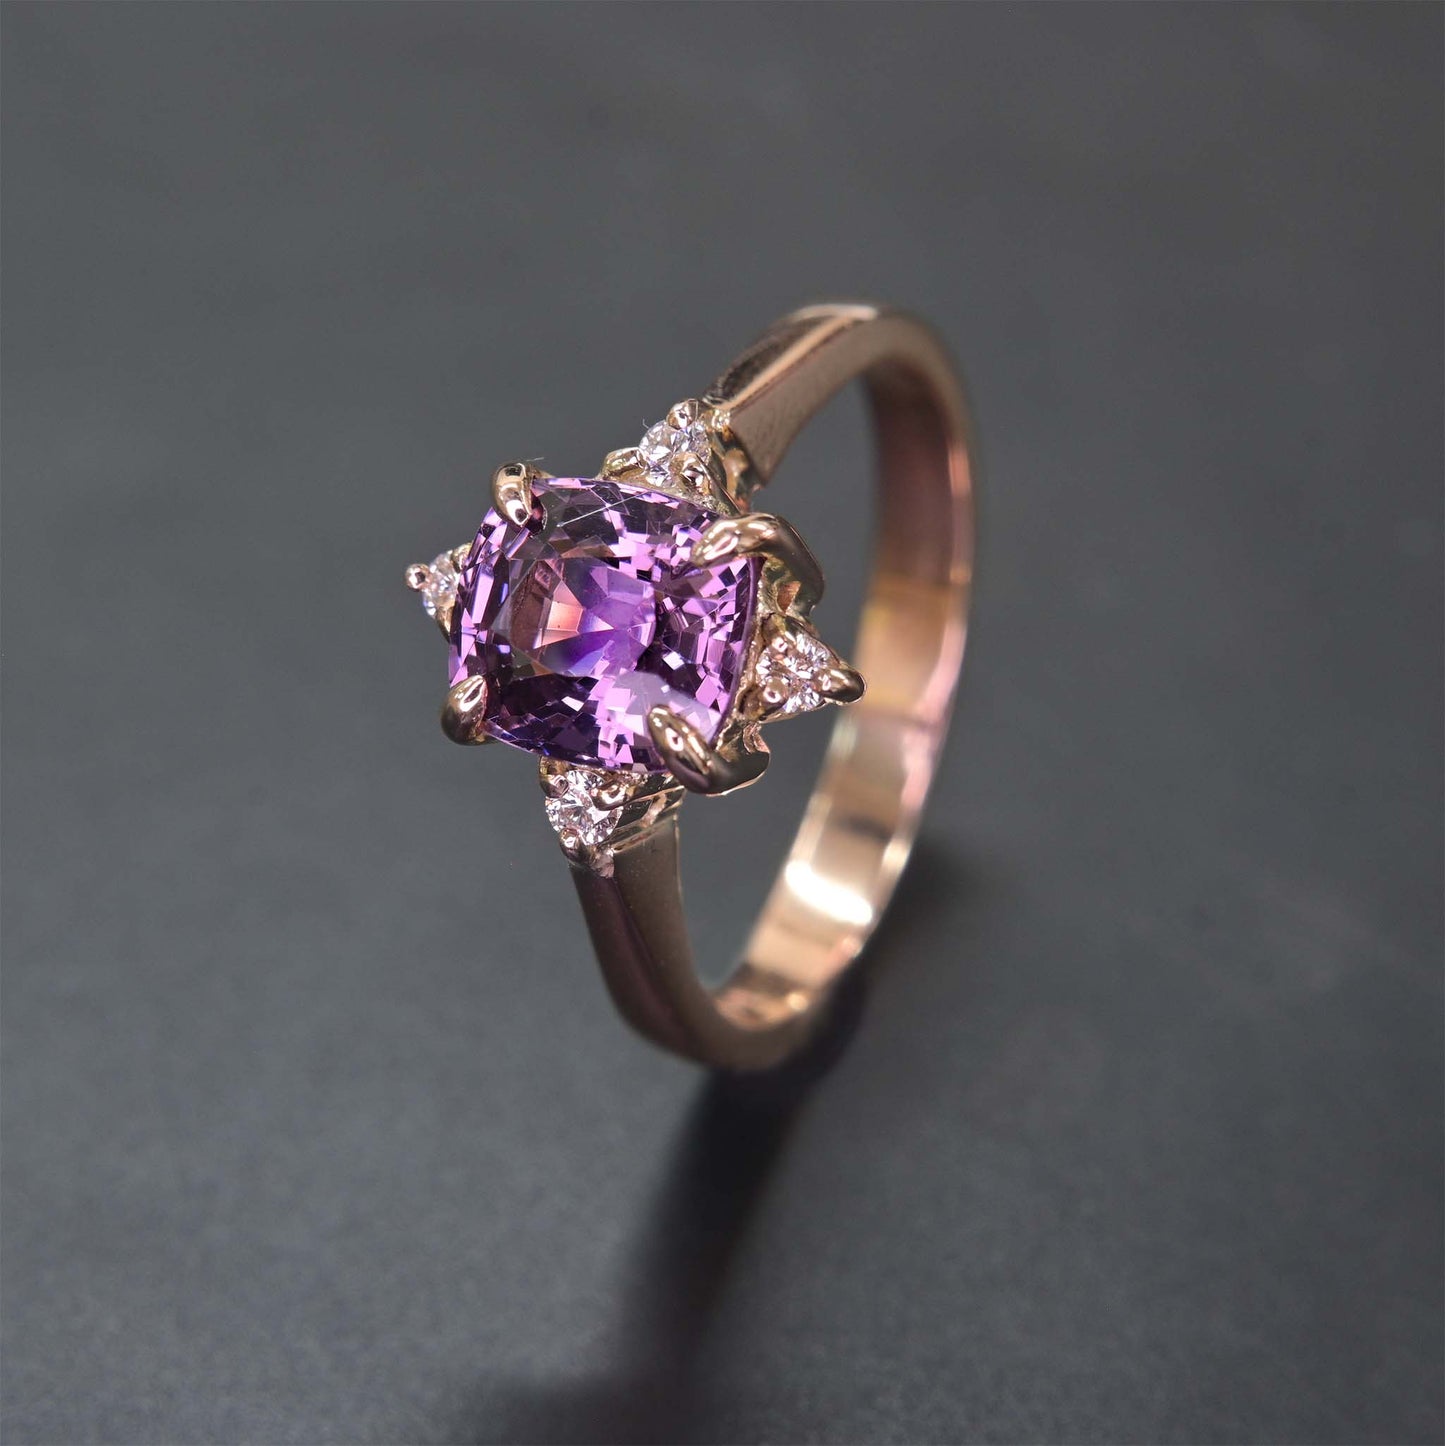 Beautiful pink spinel ring in 14k rose gold handmade in Chiang Mai, Thailand